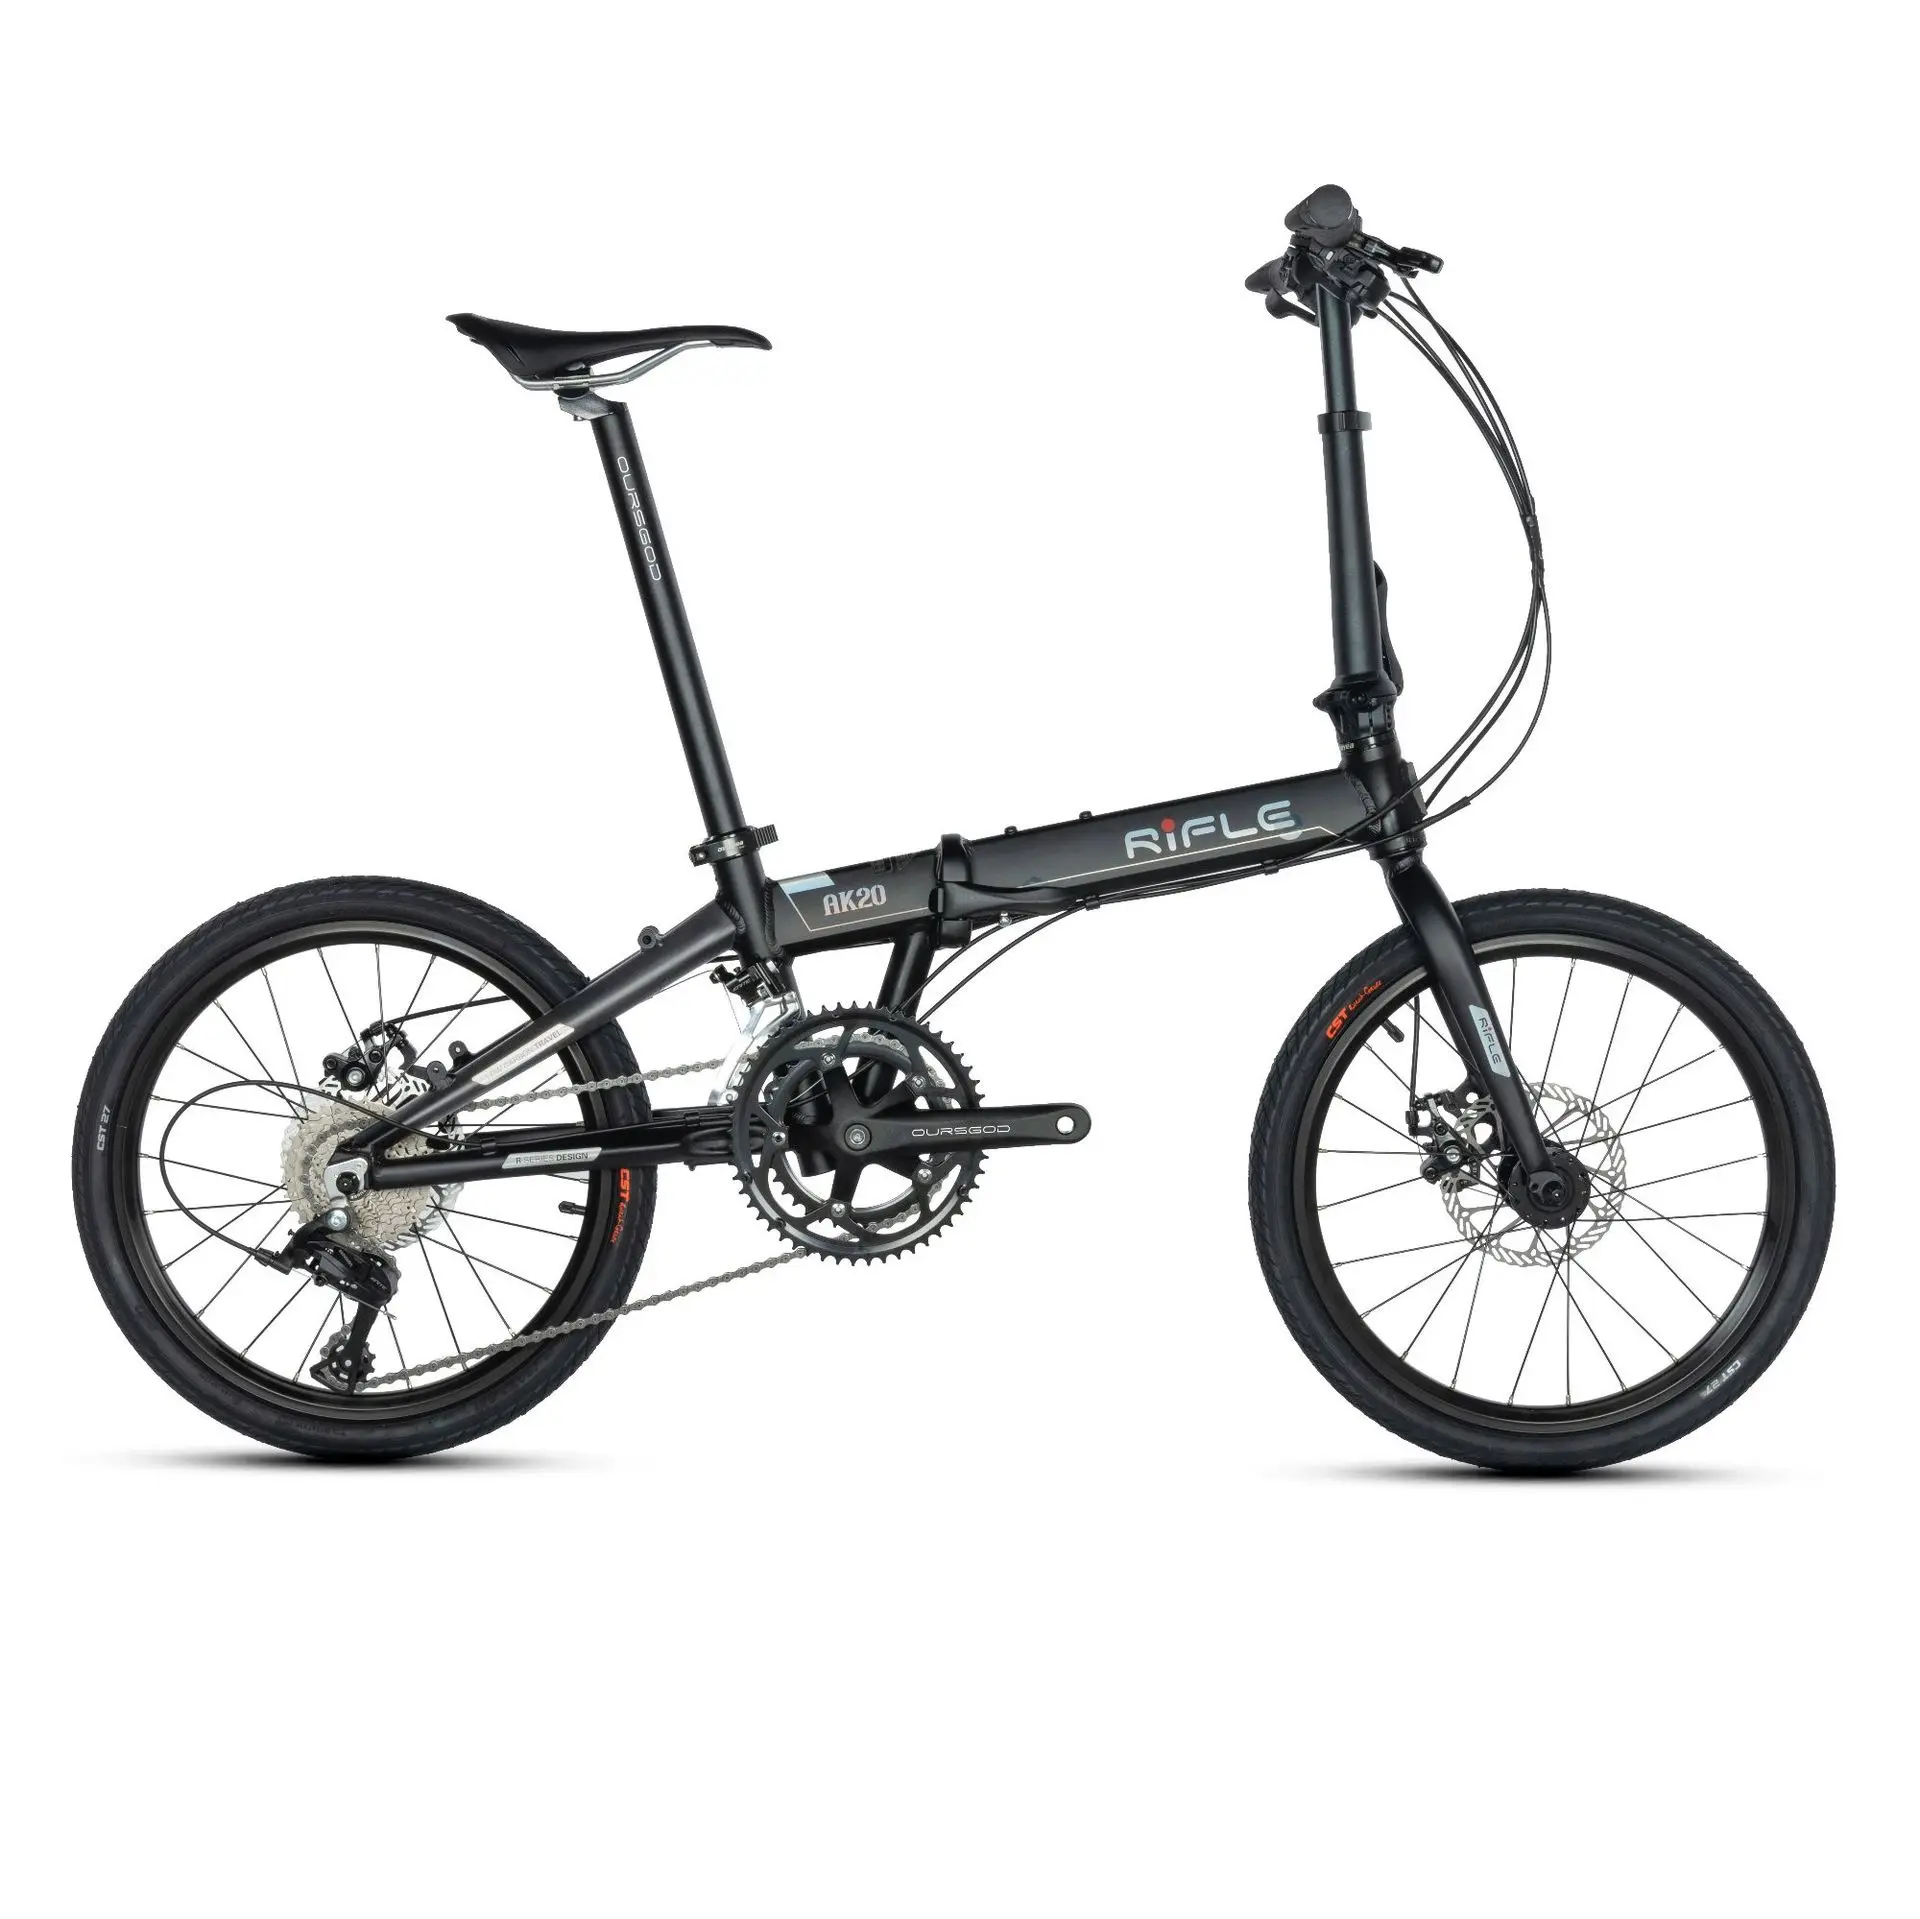 Factory Made 20 inch black folded bike with OEM customizable colors and parts folding light bike city bicycle